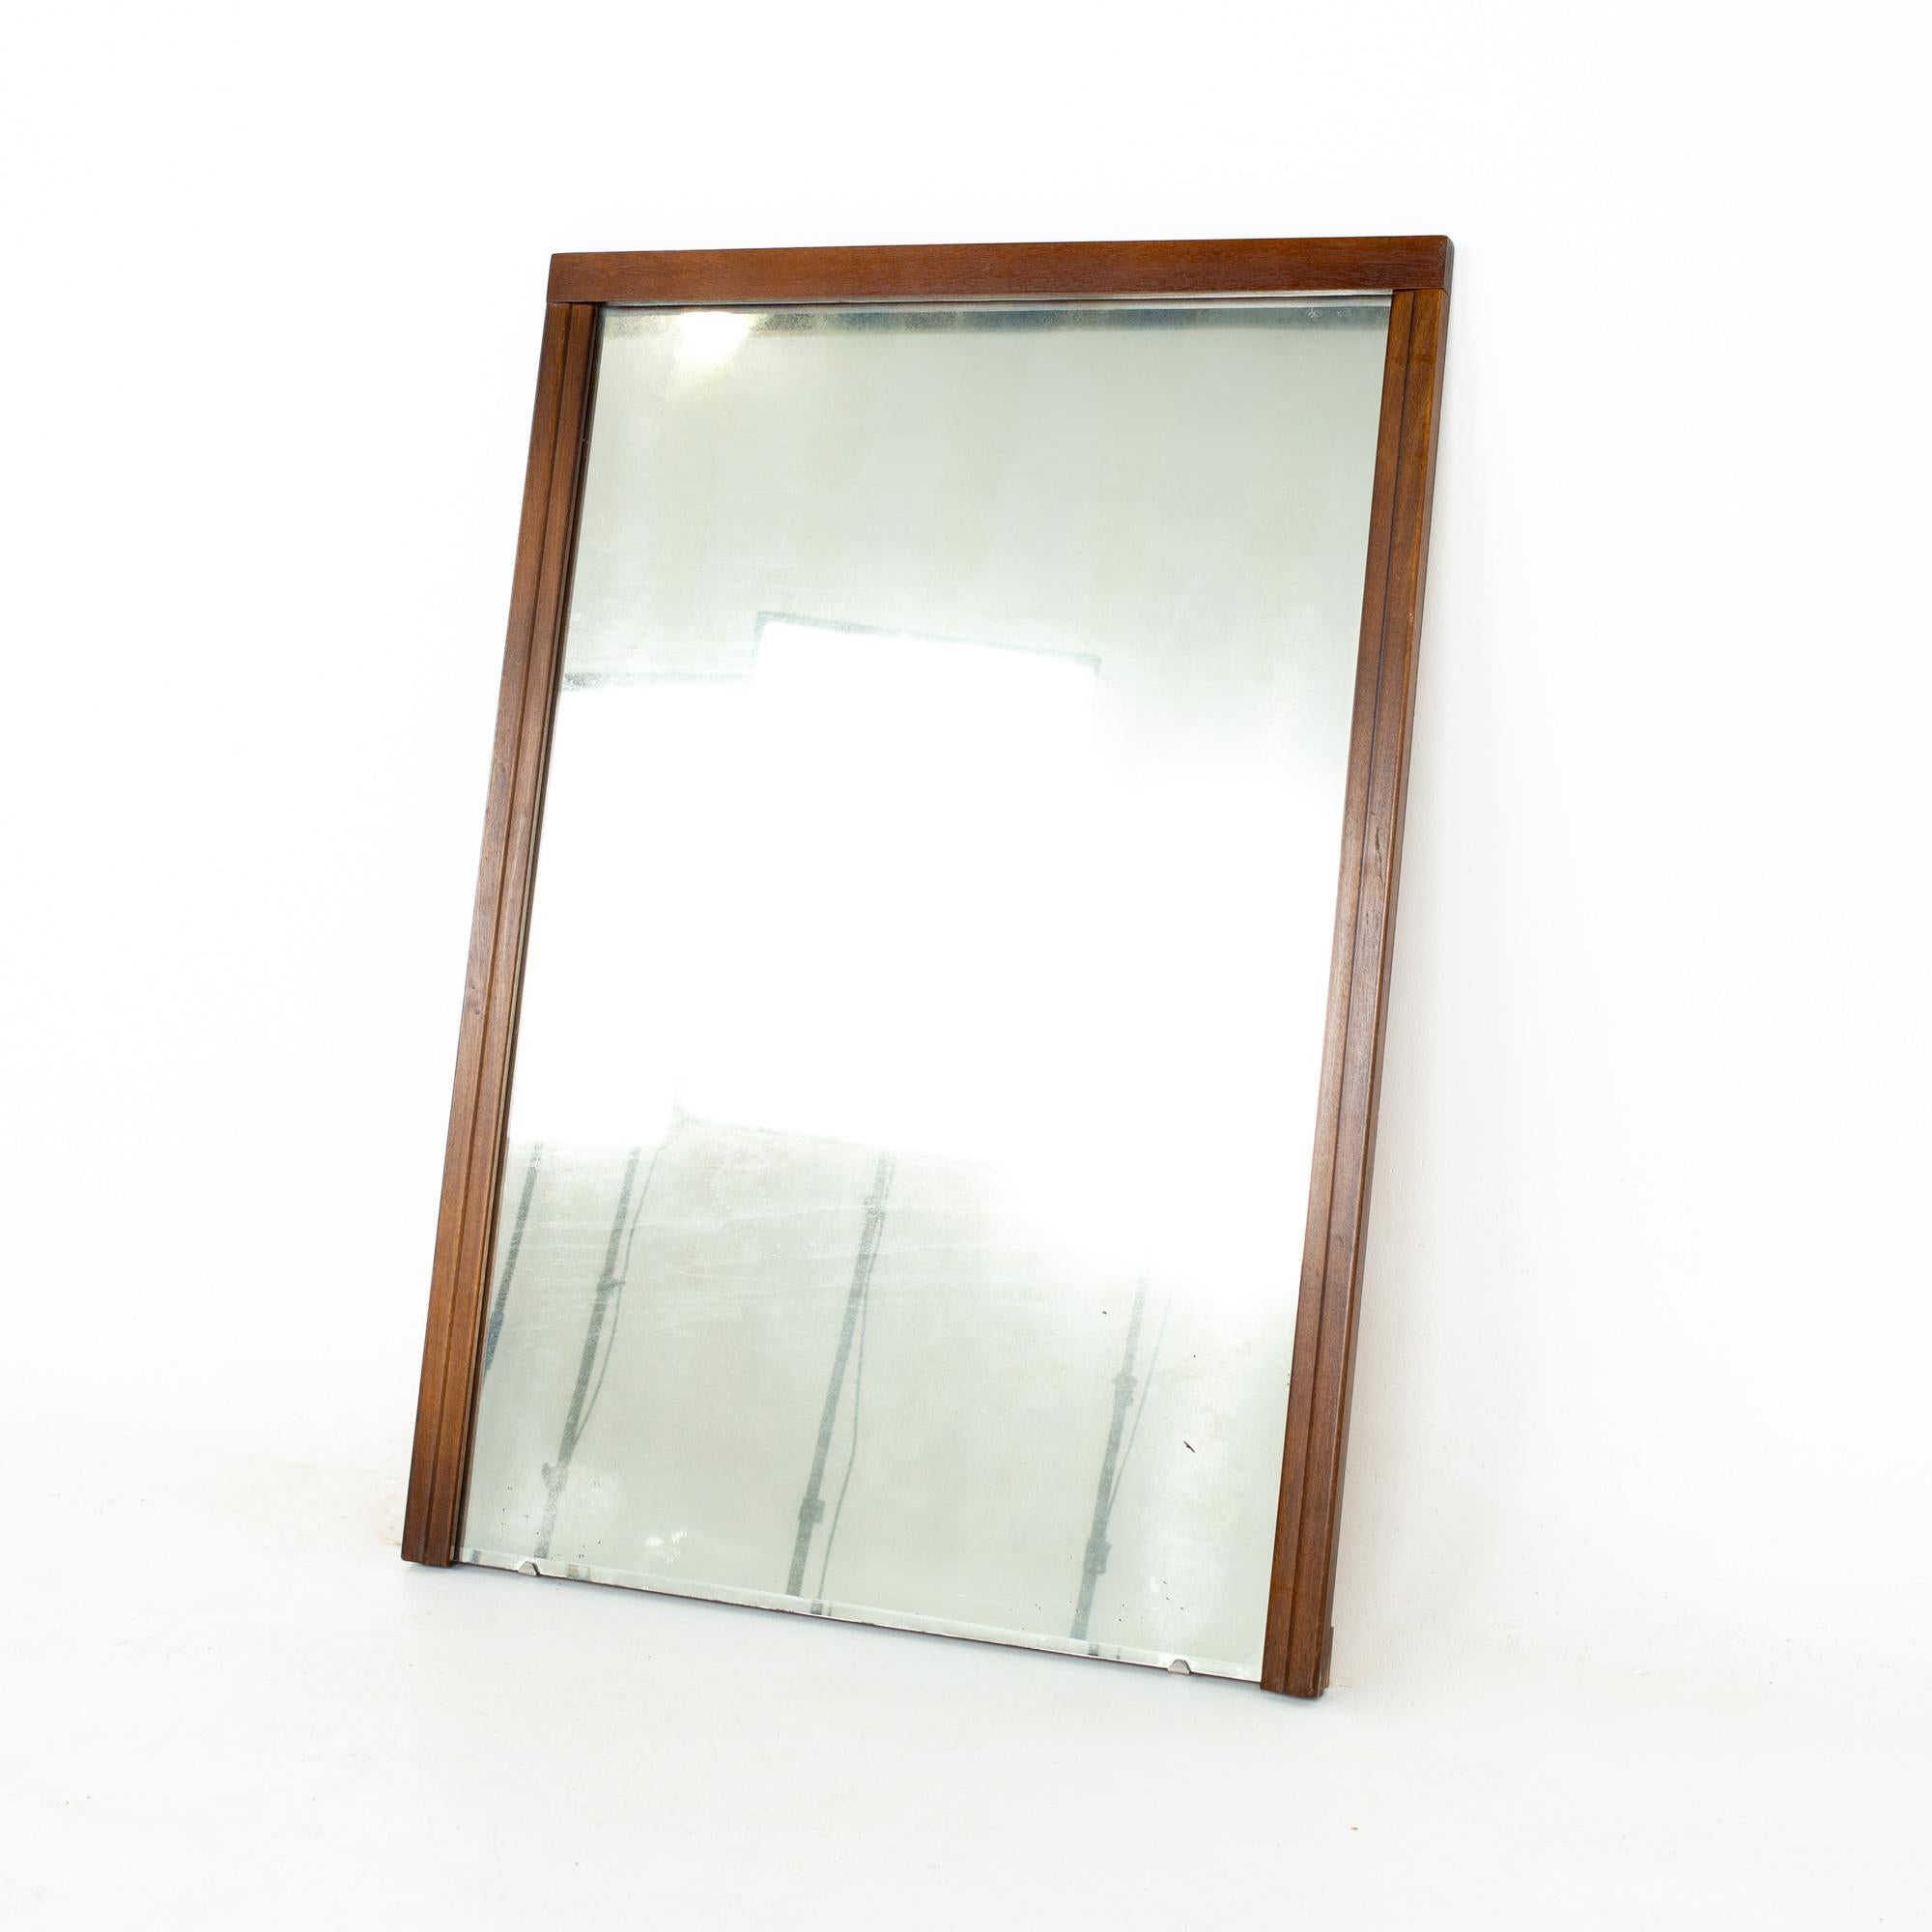 Ward furniture company mid century walnut mirror.
Mirror measures: 26 wide x 1 deep x 37 inches high

All pieces of furniture can be had in what we call restored vintage condition. That means the piece is restored upon purchase so it’s free of